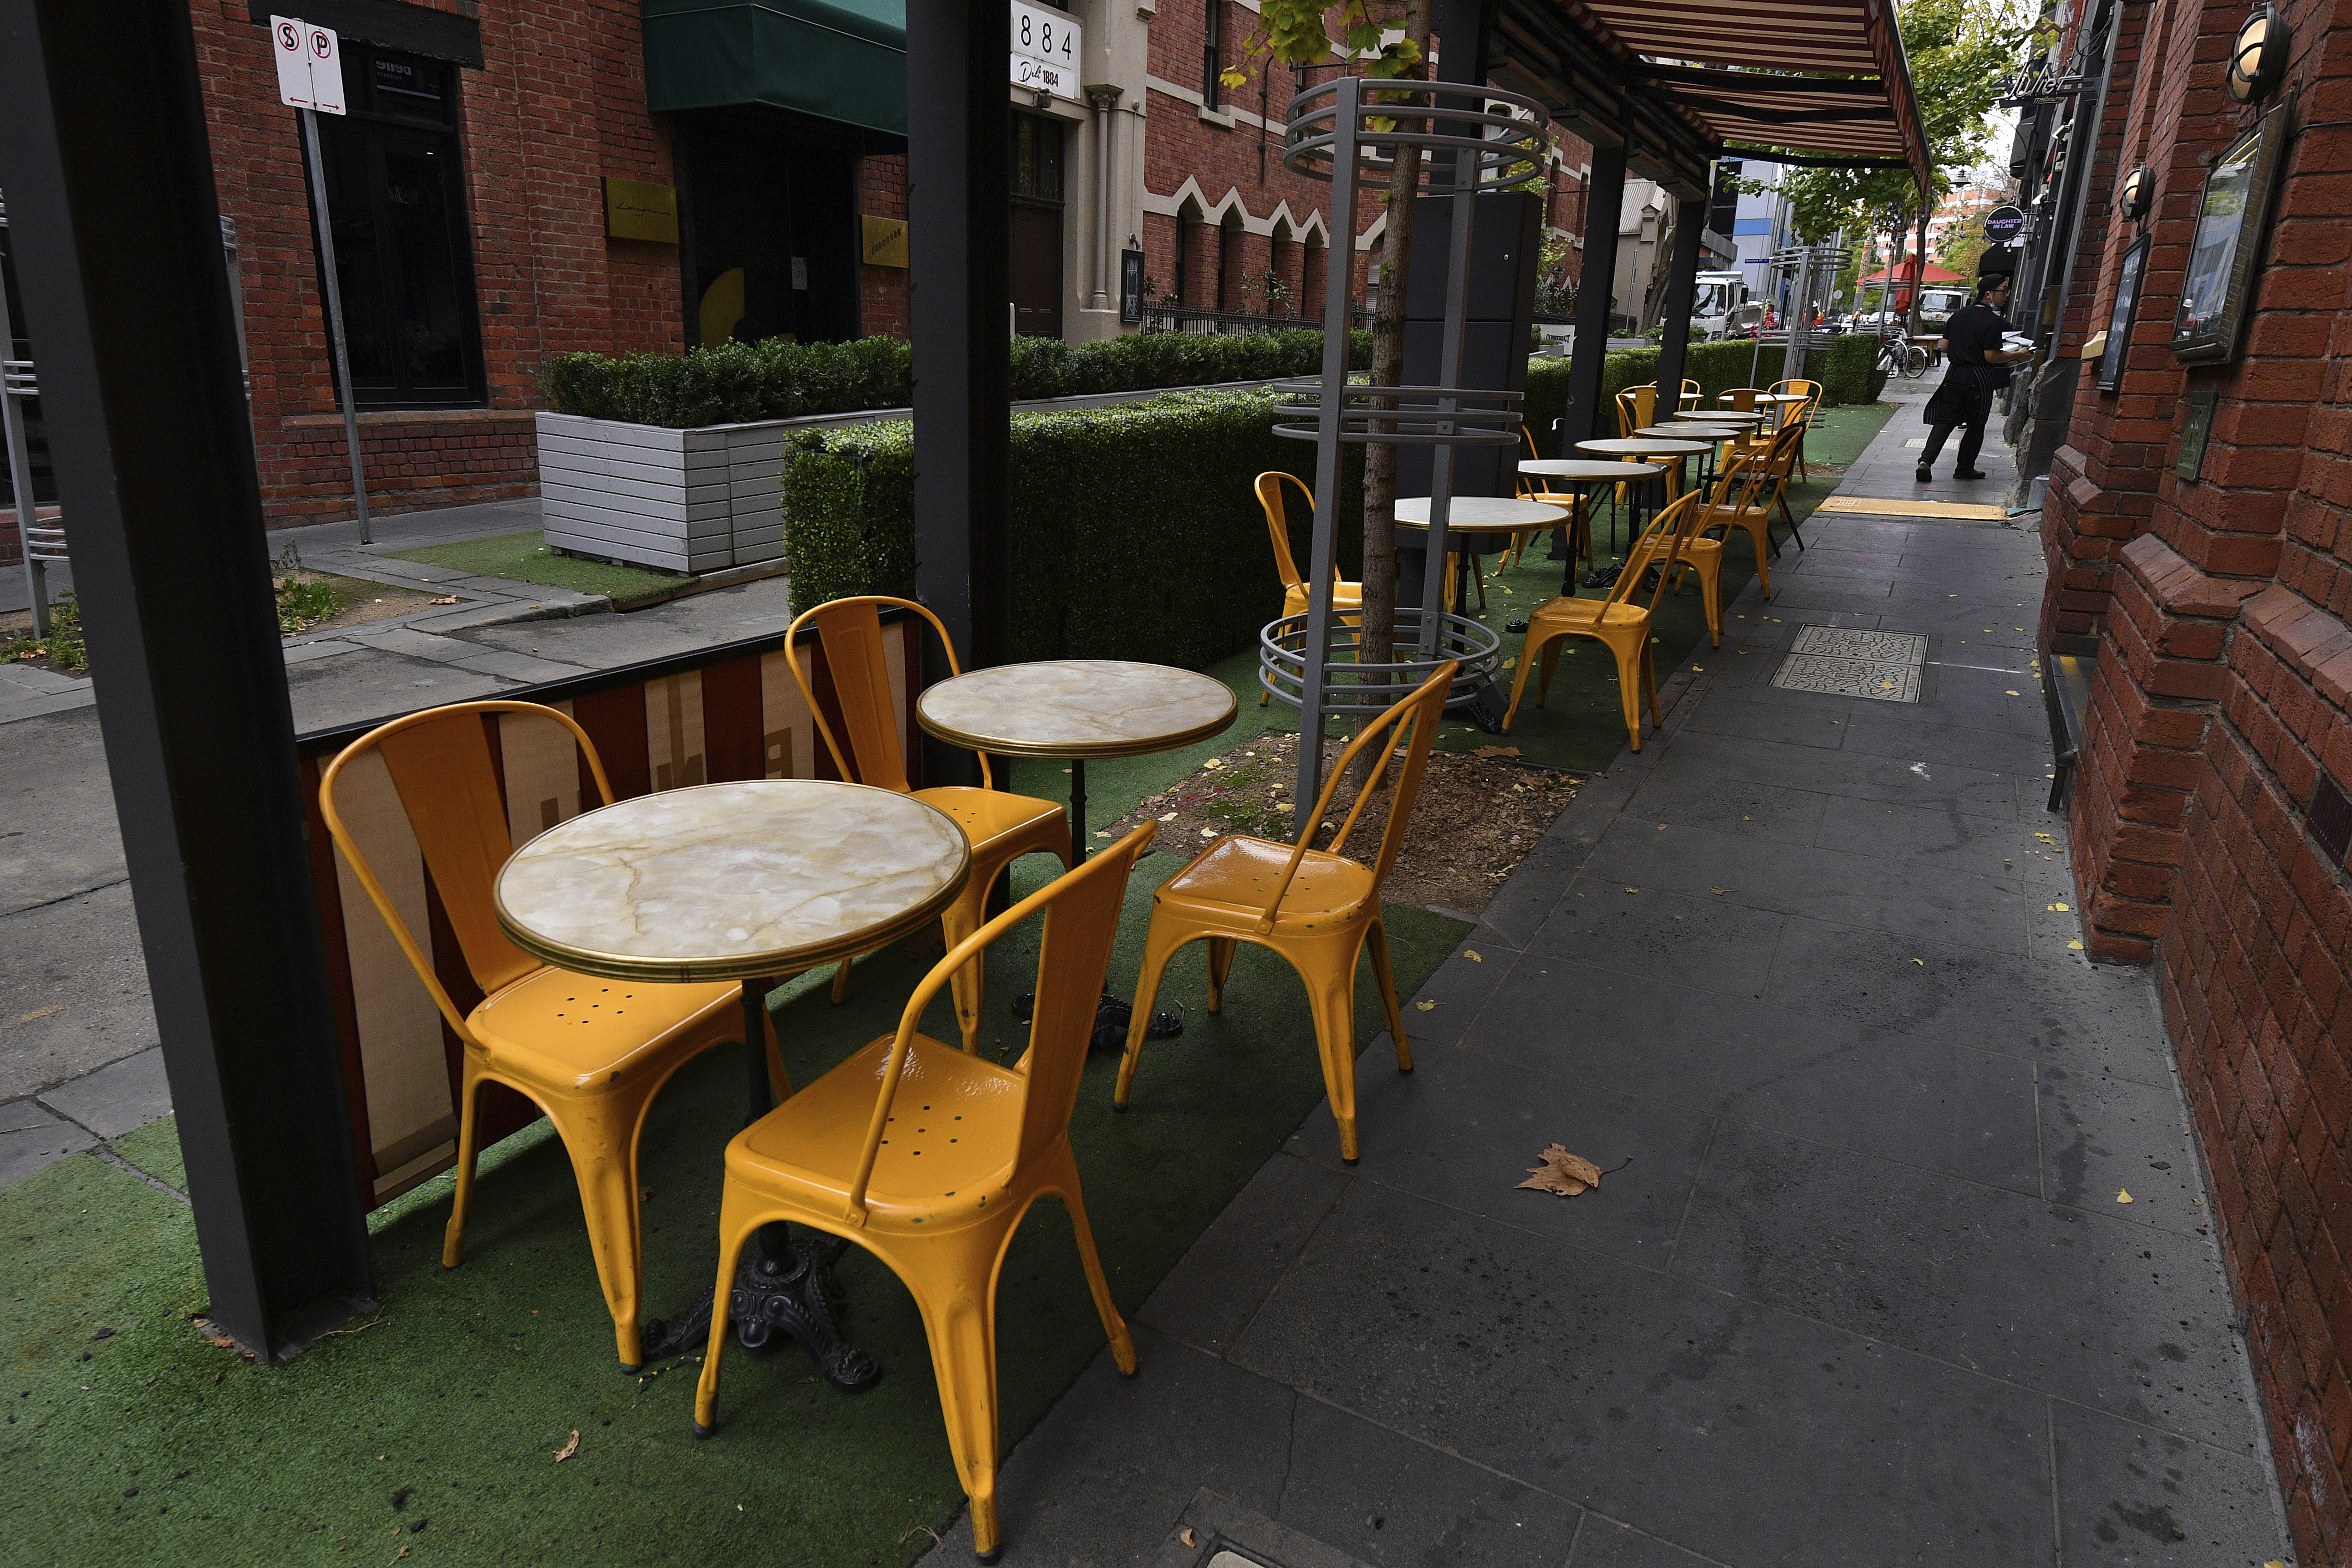 Empty seats at a cafe in Melbourne, Australia